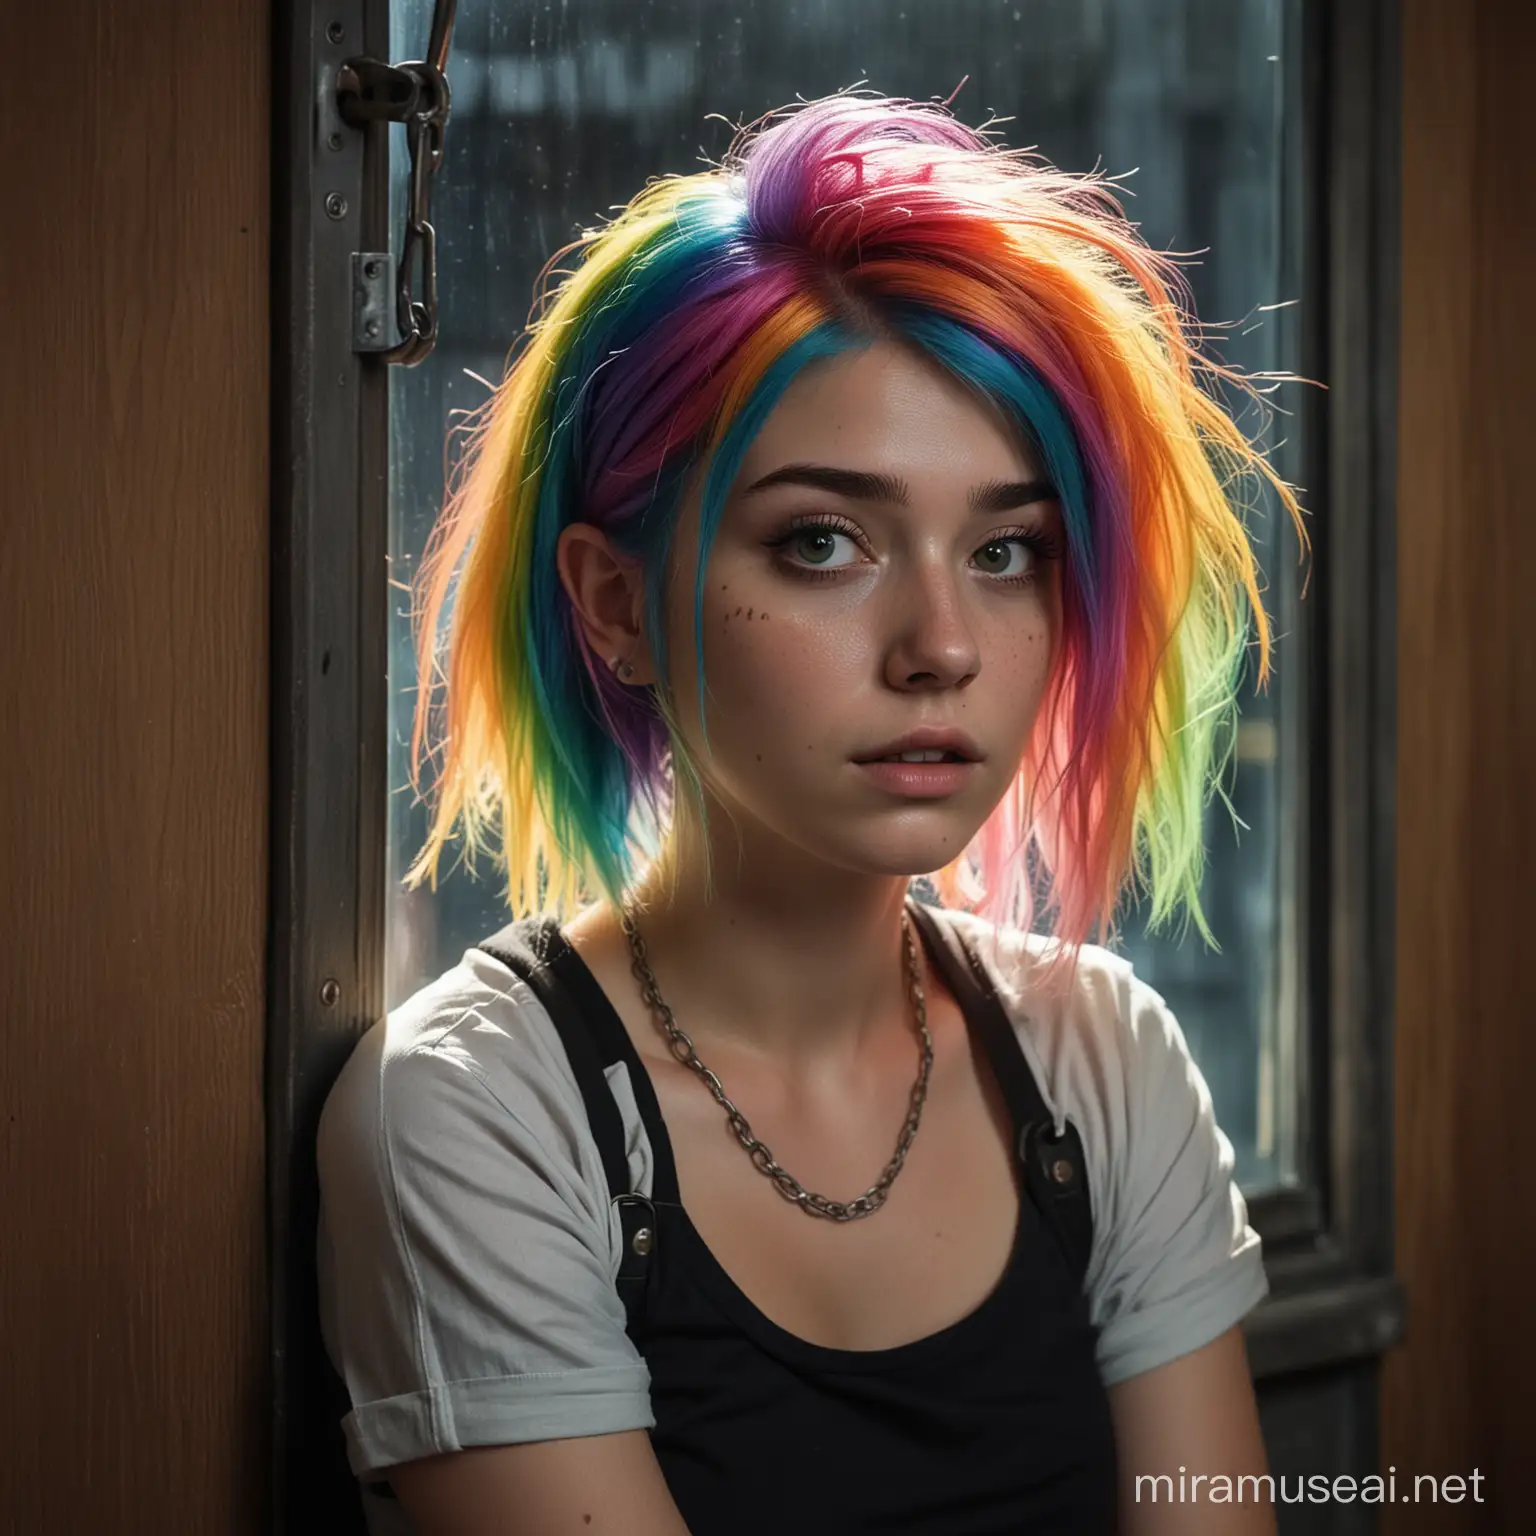 Photo, In the dimly lit police station, a small 18yo Mable Pines with rainbow hair sits in shackles, her eyes wide with fear, bosom transparent. The night light from the window casts a haunting glow on her face, while the bars on the windows create a sense of entrapment. As she nervously scratches drawings into the wooden walls, the room feels like a prison